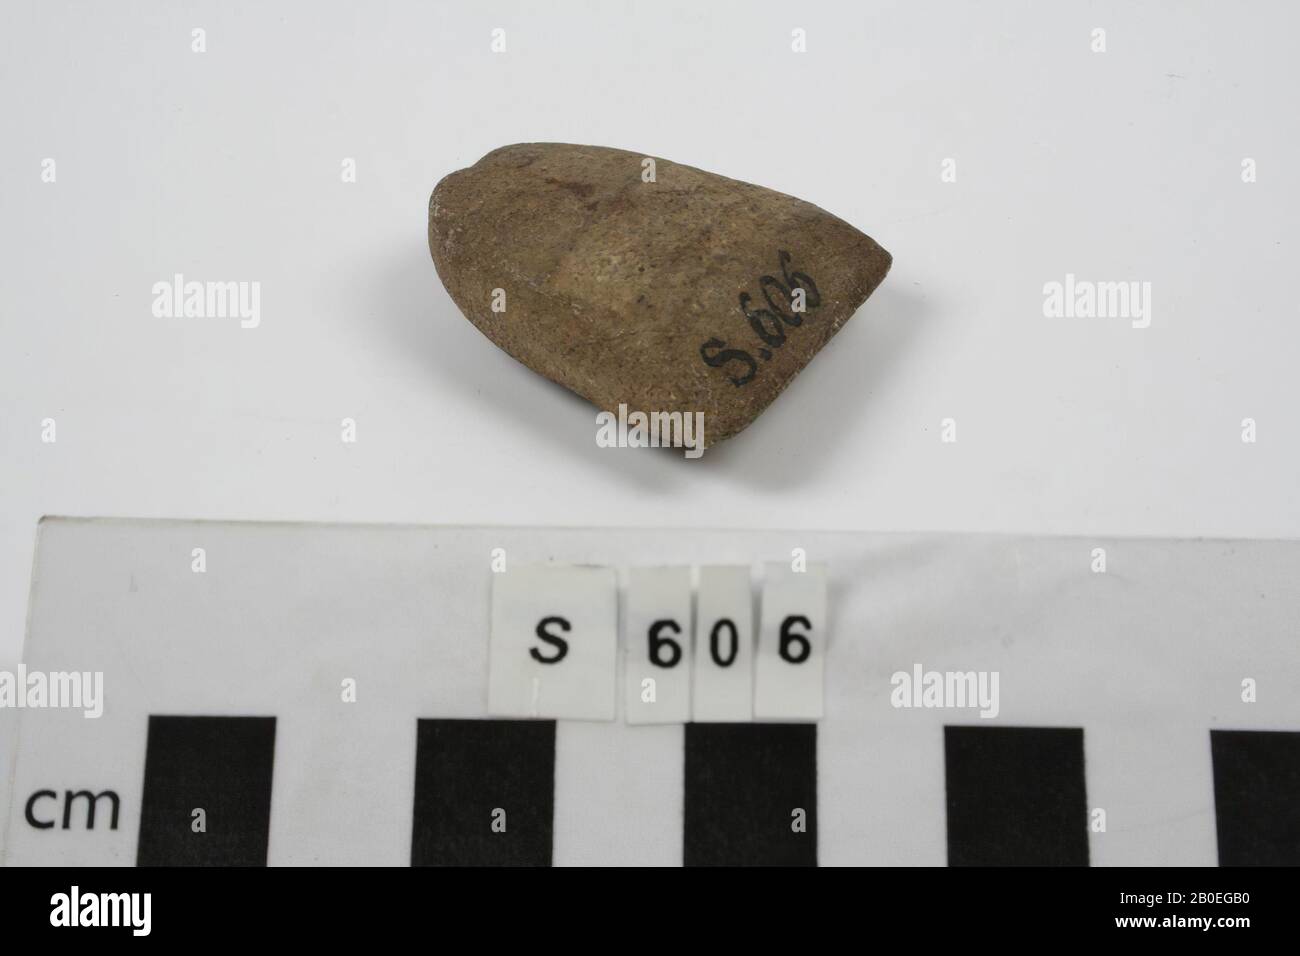 A wedge-shaped stone ax, wide-ranging to the cut., Tools, weapon, stone, L 4.3 cm, Turkey Stock Photo